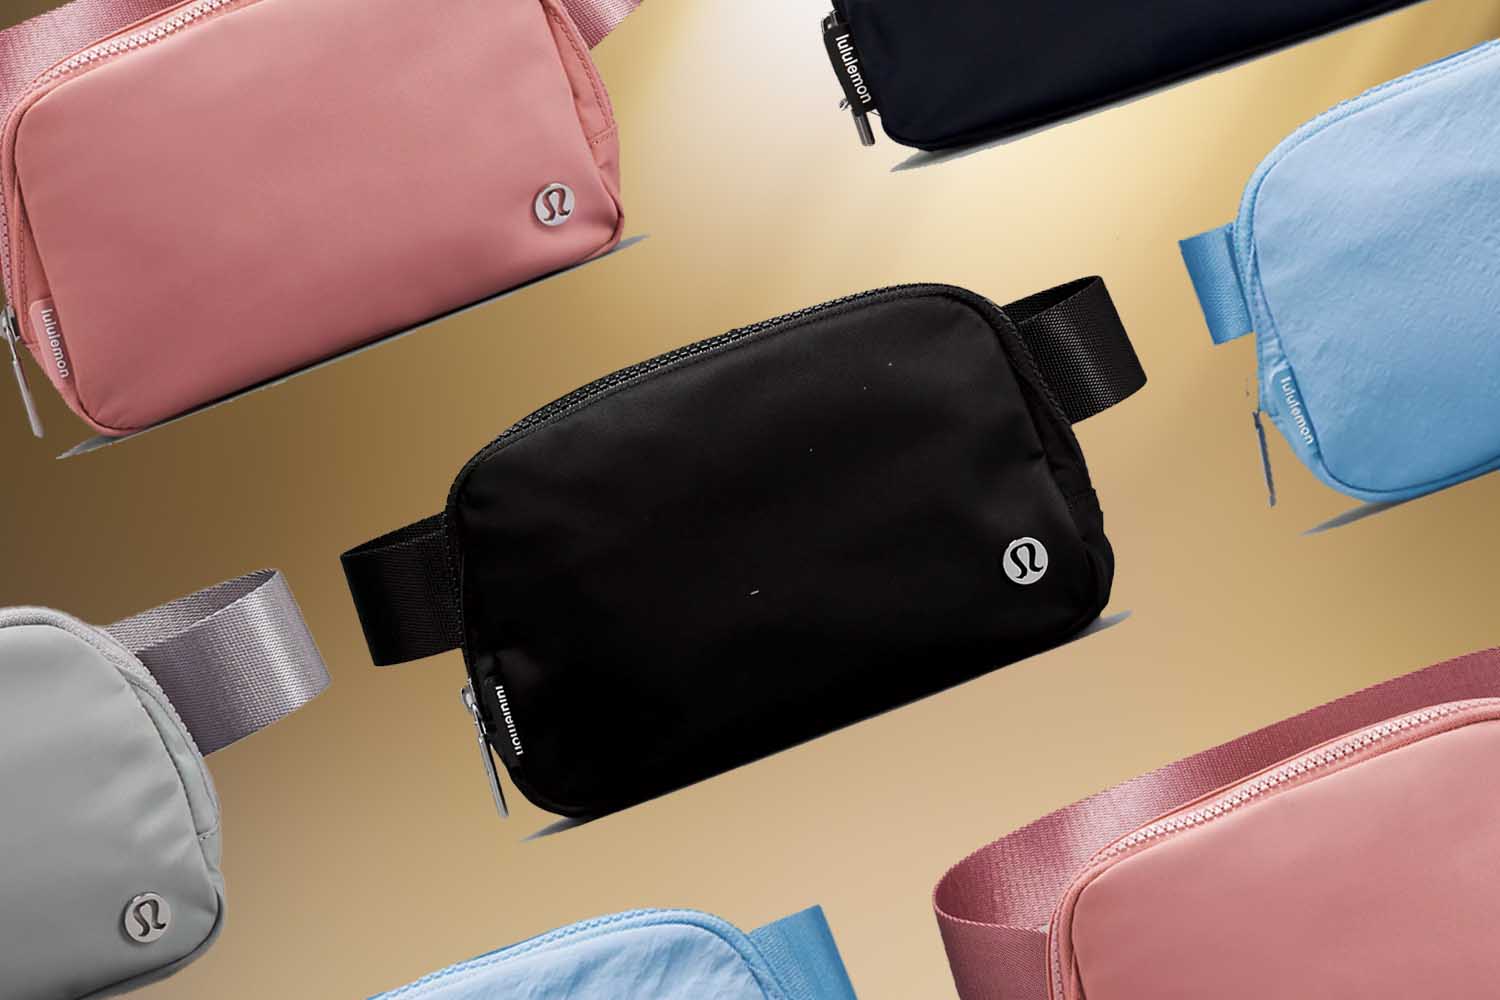 The Lululemon Belt Bag You See Everywhere Is Now Available in New Colors